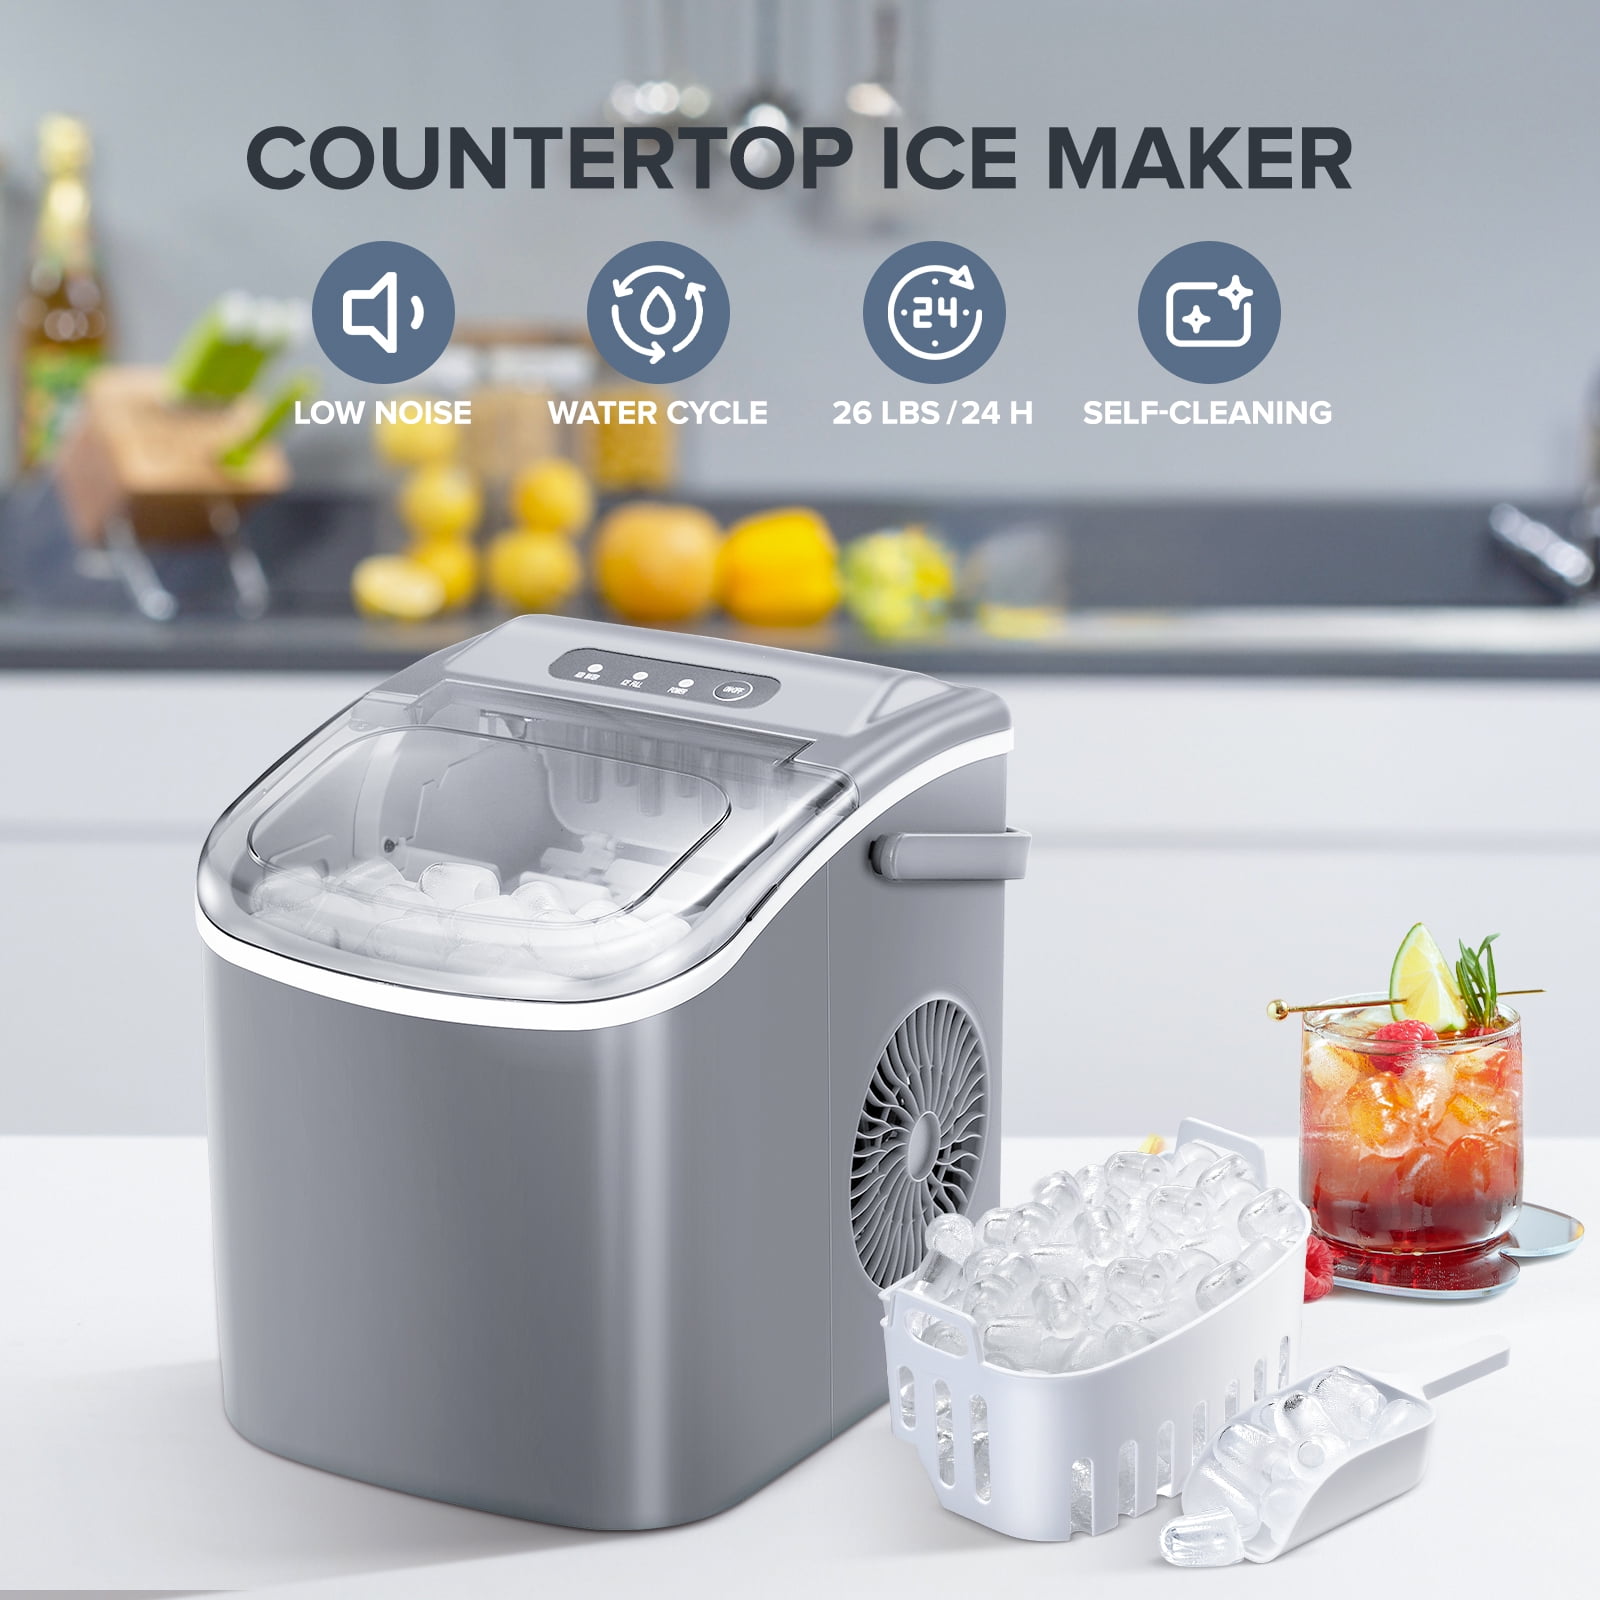 Kndko Ice Maker Countertop,Self Cleaning Ice Maker, Home Ice Makers  Countertop for Home Bar RV